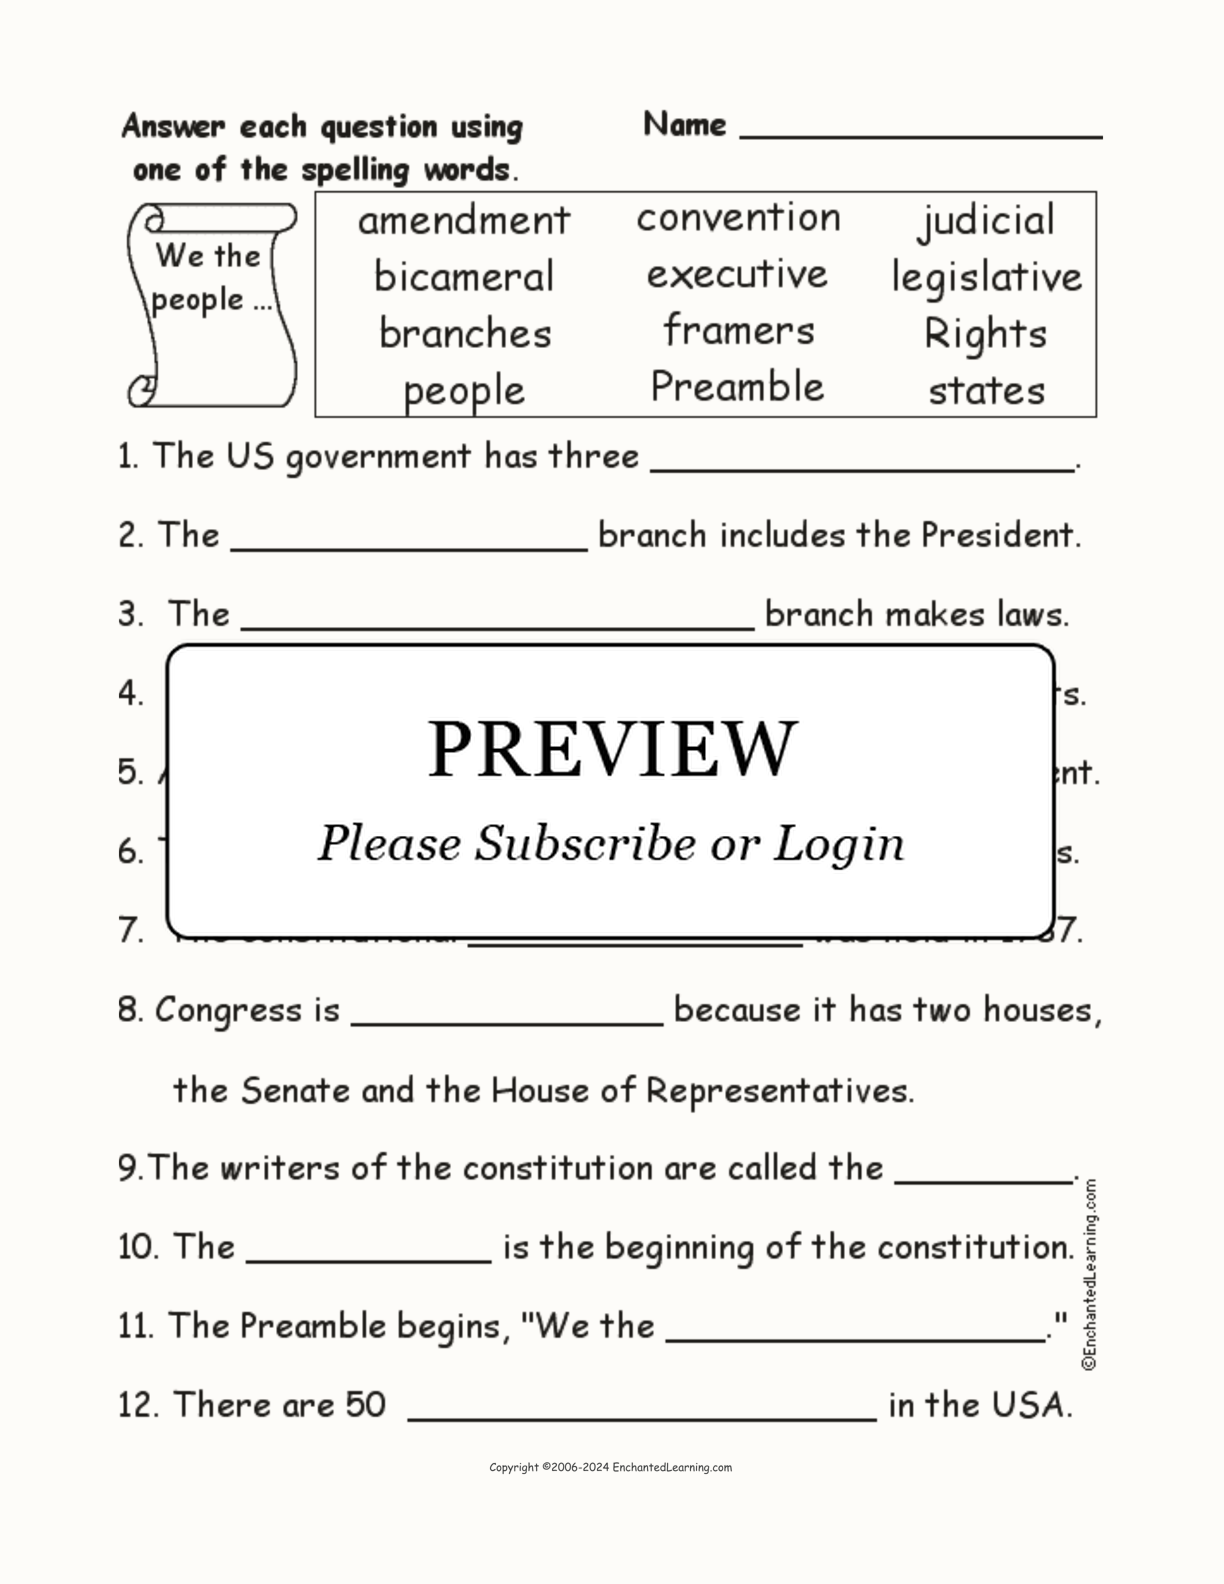 Constitution Spelling Word Questions interactive worksheet page 1